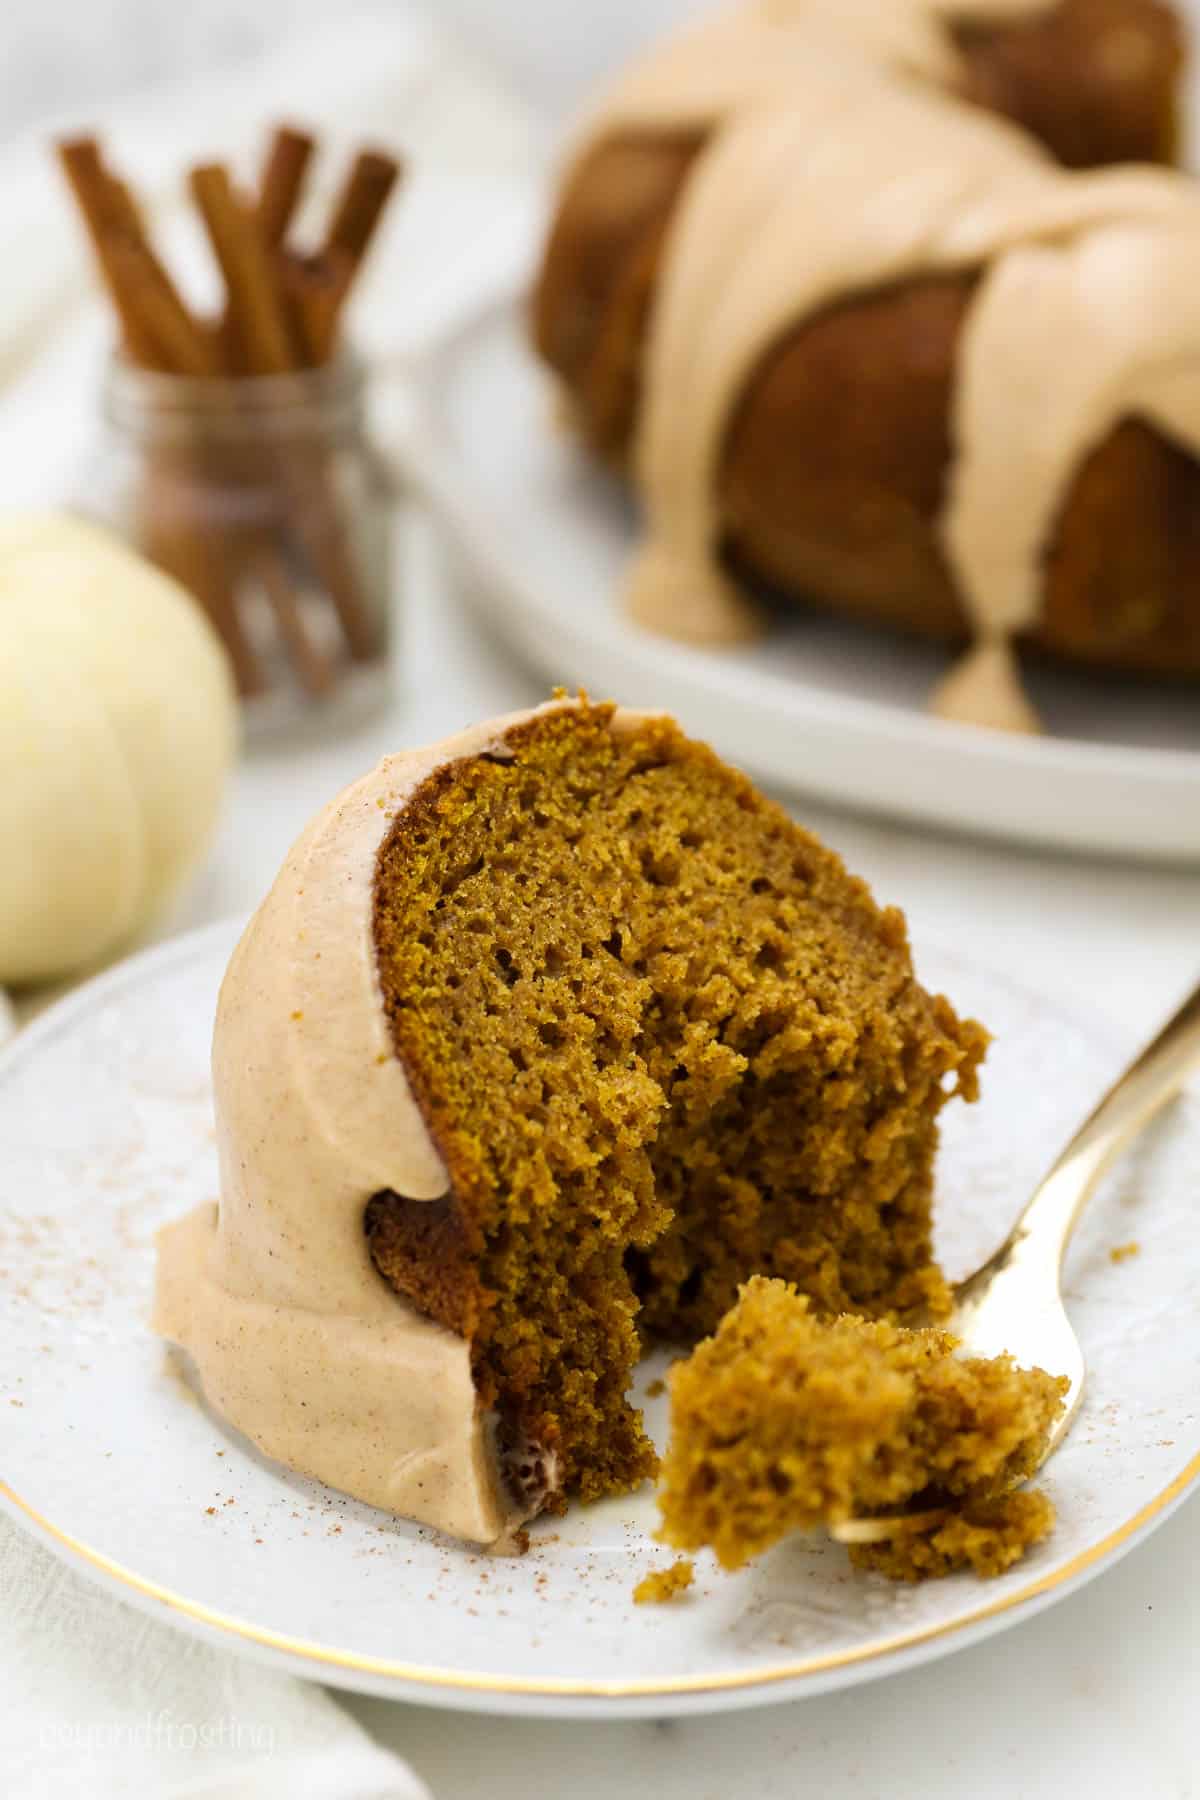 A slice of pumpkin cake on a white gold rimmed plate with a few bites taken our of it